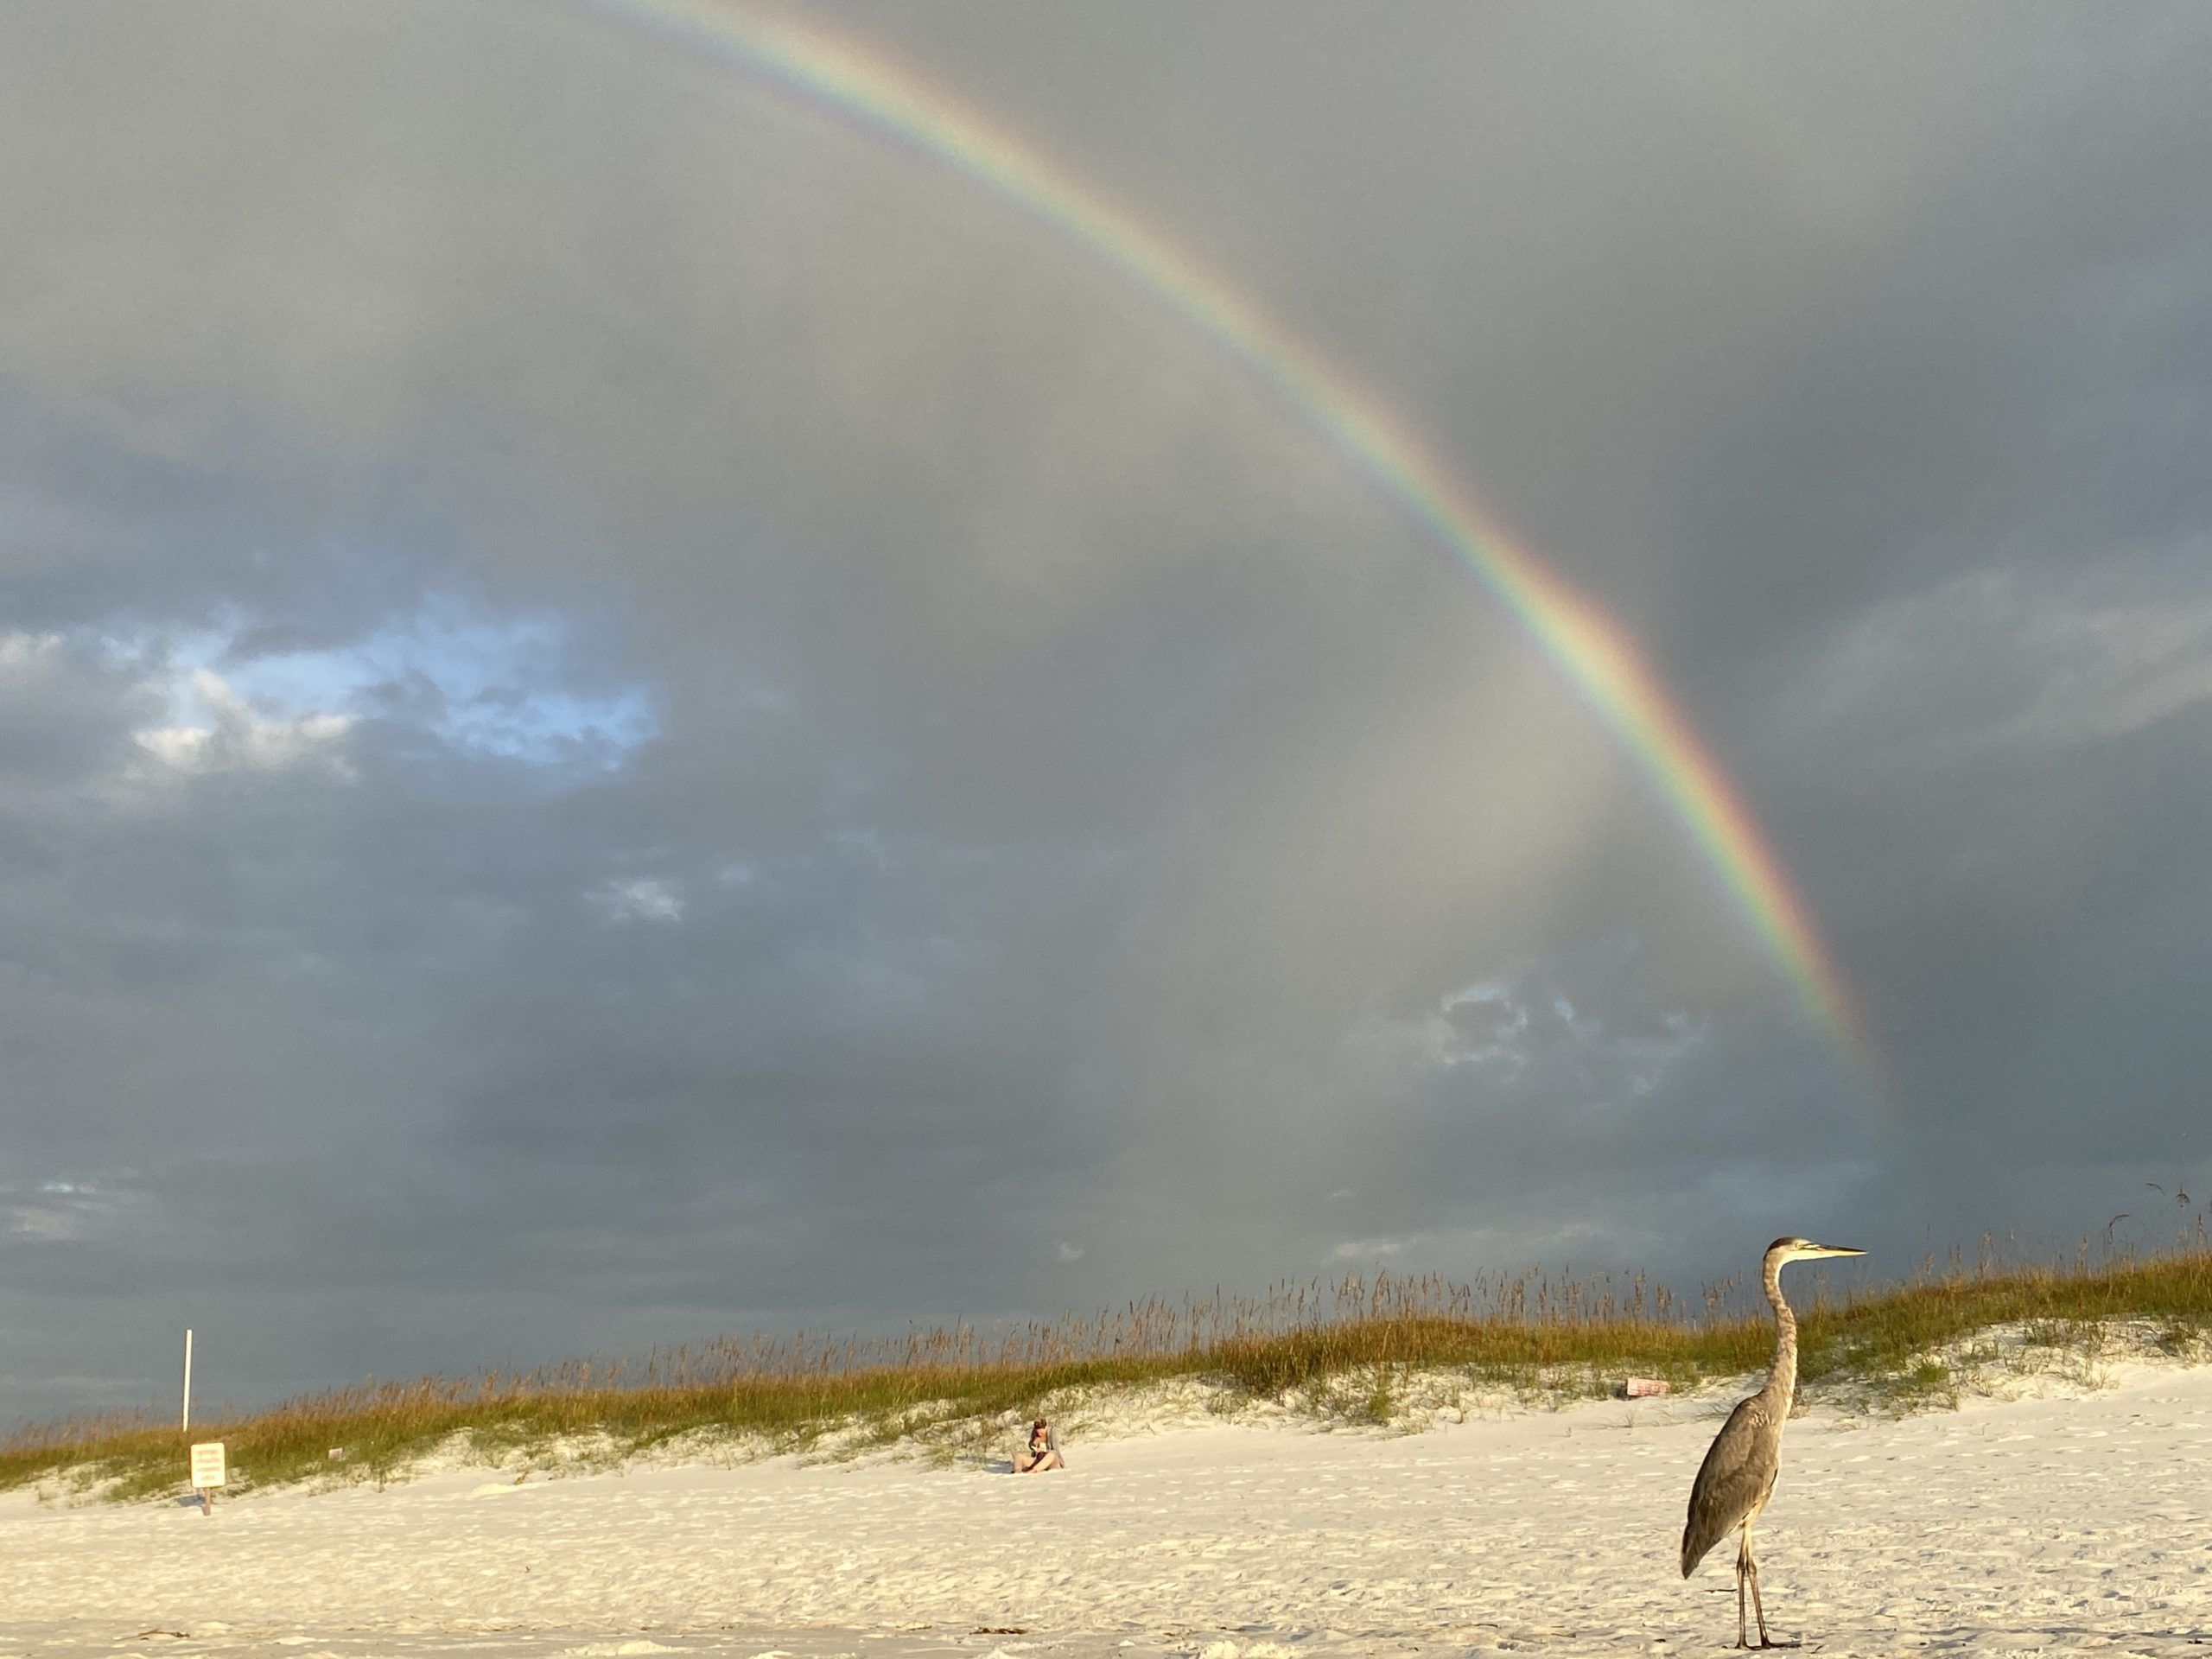 Today's Photo of the Day comes from Deanna Heikkinen.

"A birders pot of gold at the end of the rainbow!" 🌈